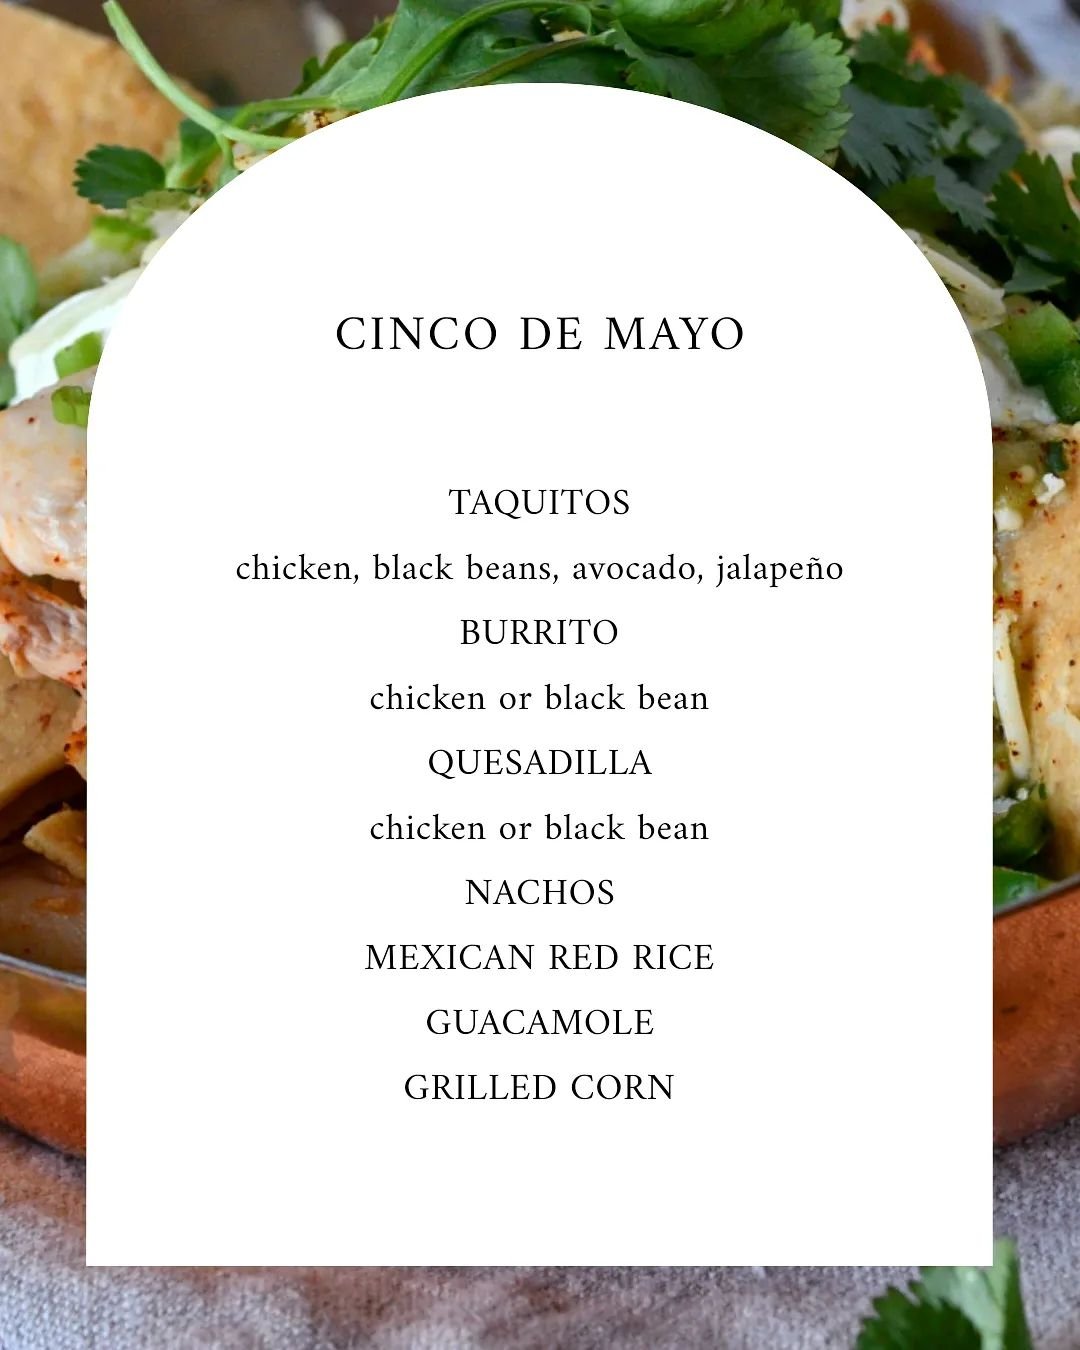 Happy Cinco de Mayo from everyone here at Cooked! Check out our menu for today: taquitos, burritos, grab-and-go nachos, queso-corn dip, and so much more! Great for dinner at home or to bring to a party. Here for you today from 9-3! 

See our Daily Sp